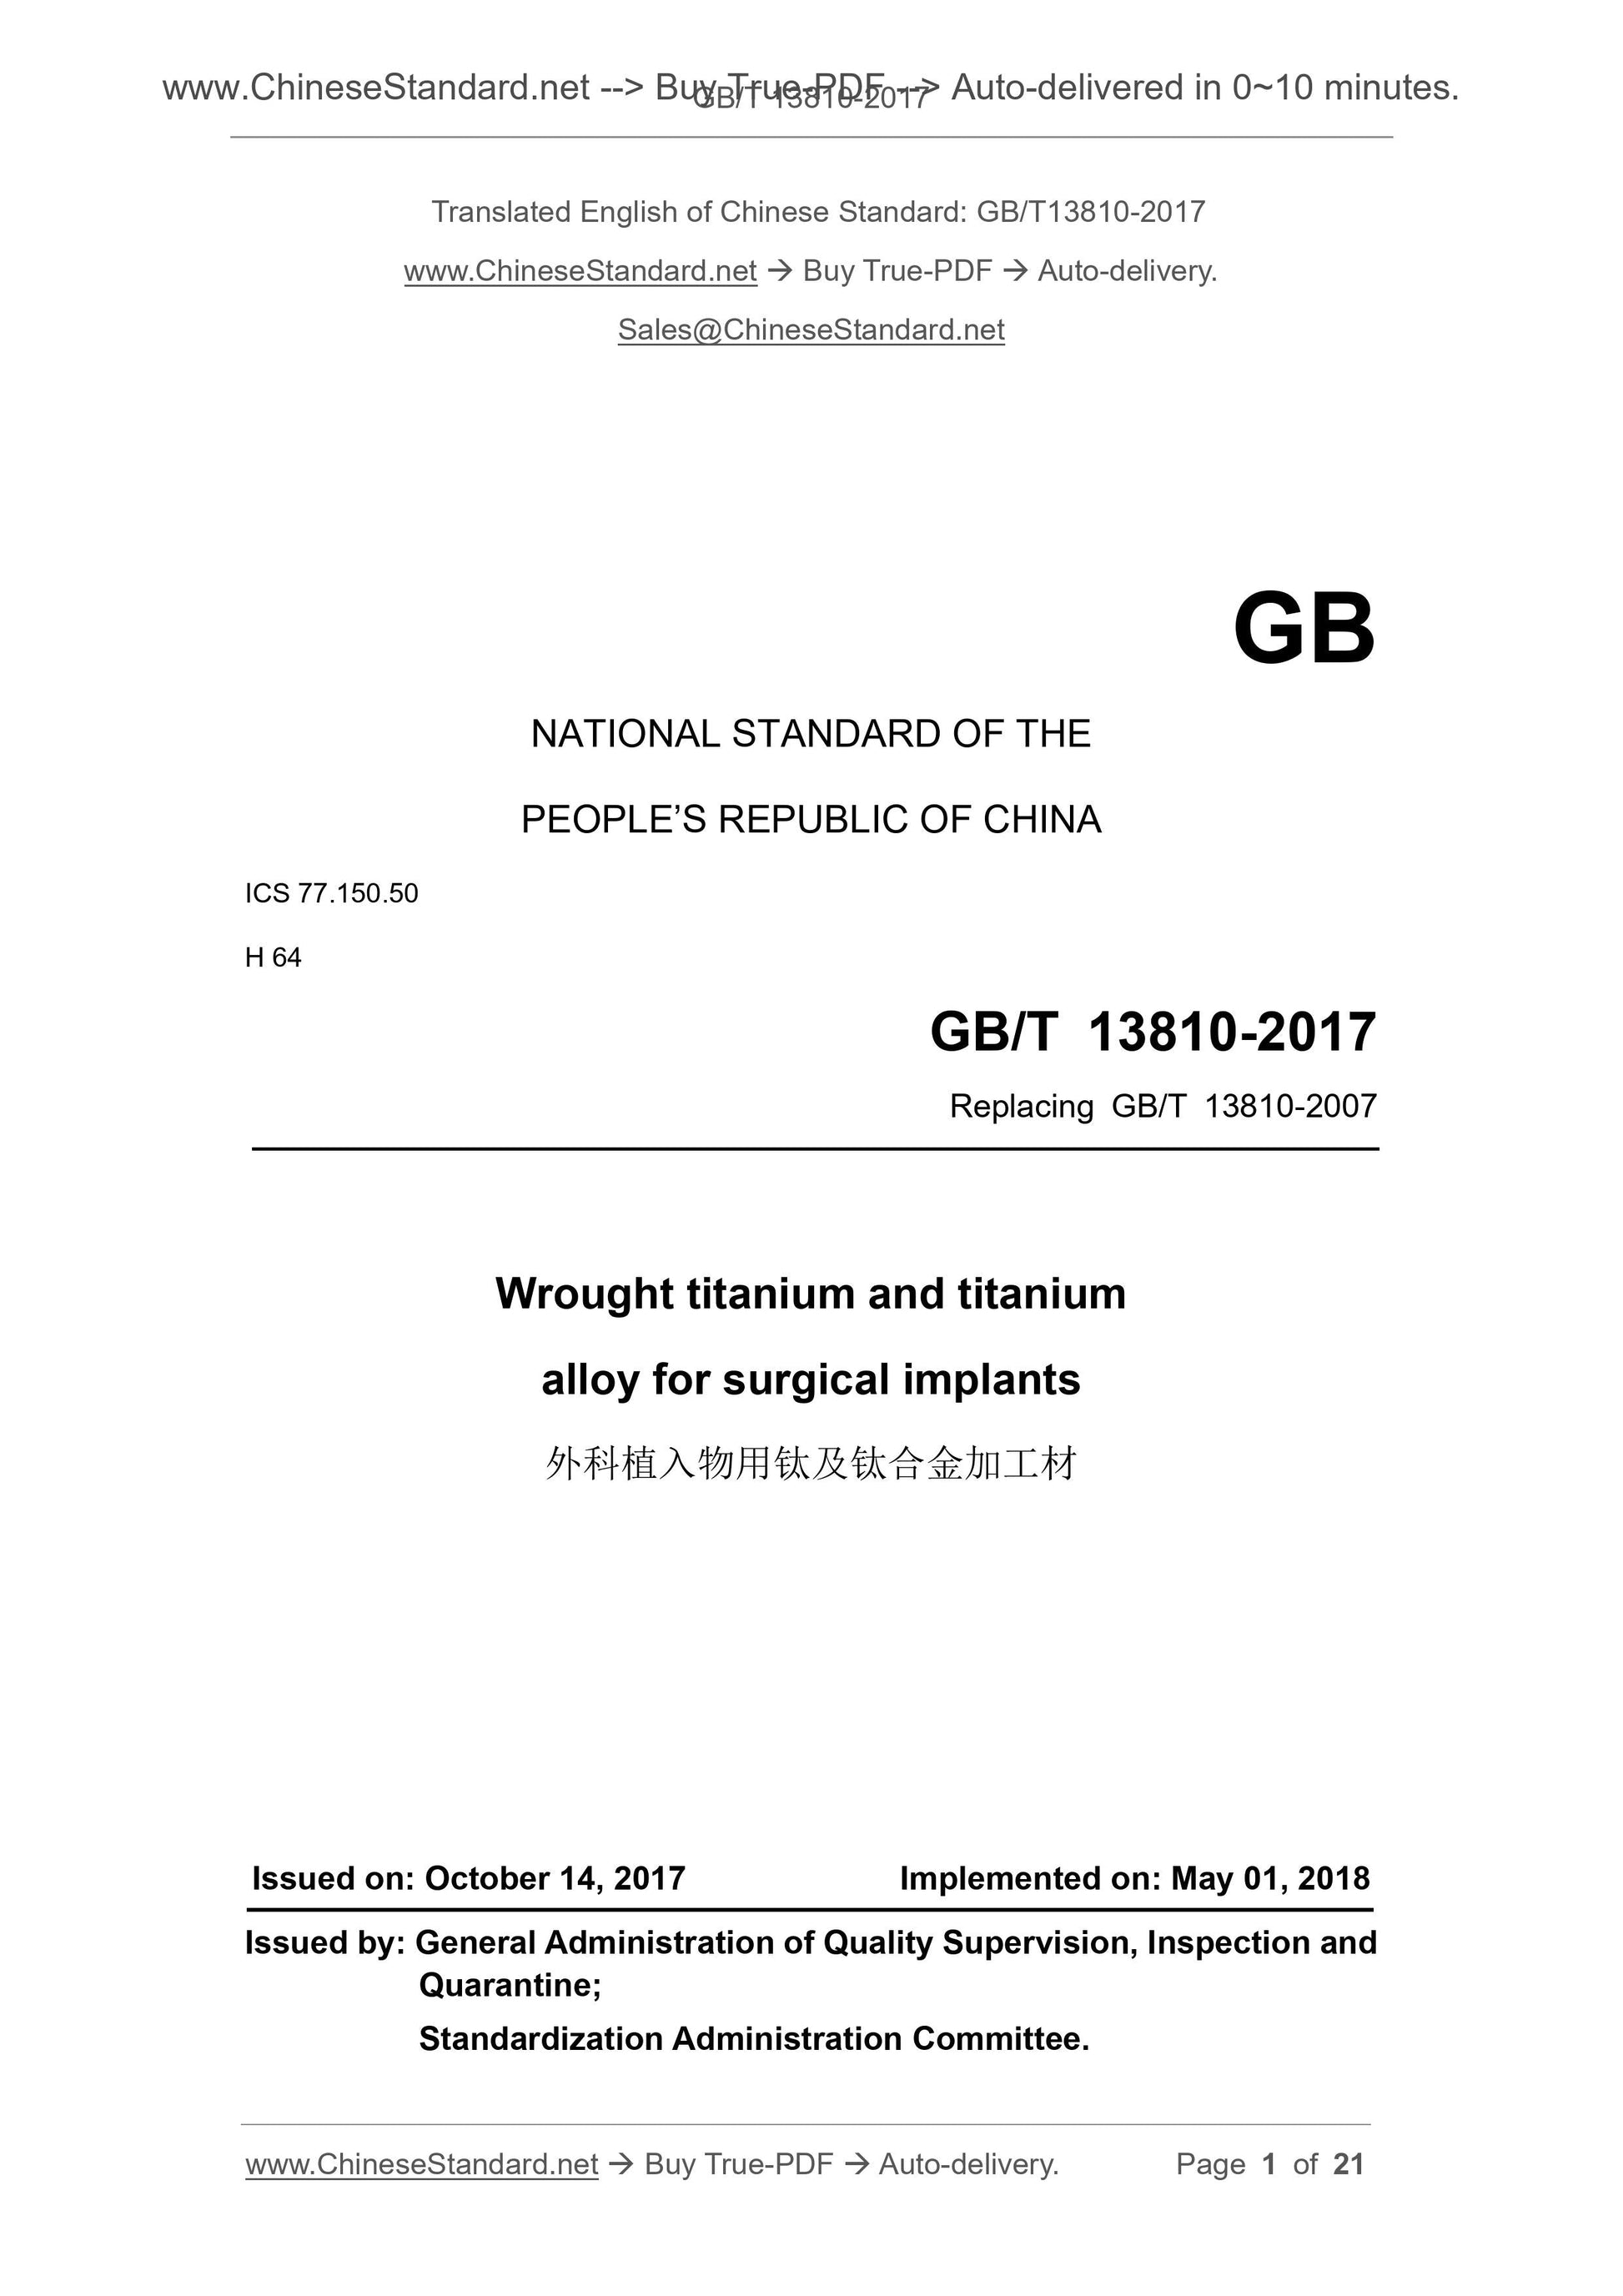 GB/T 13810-2017 Page 1